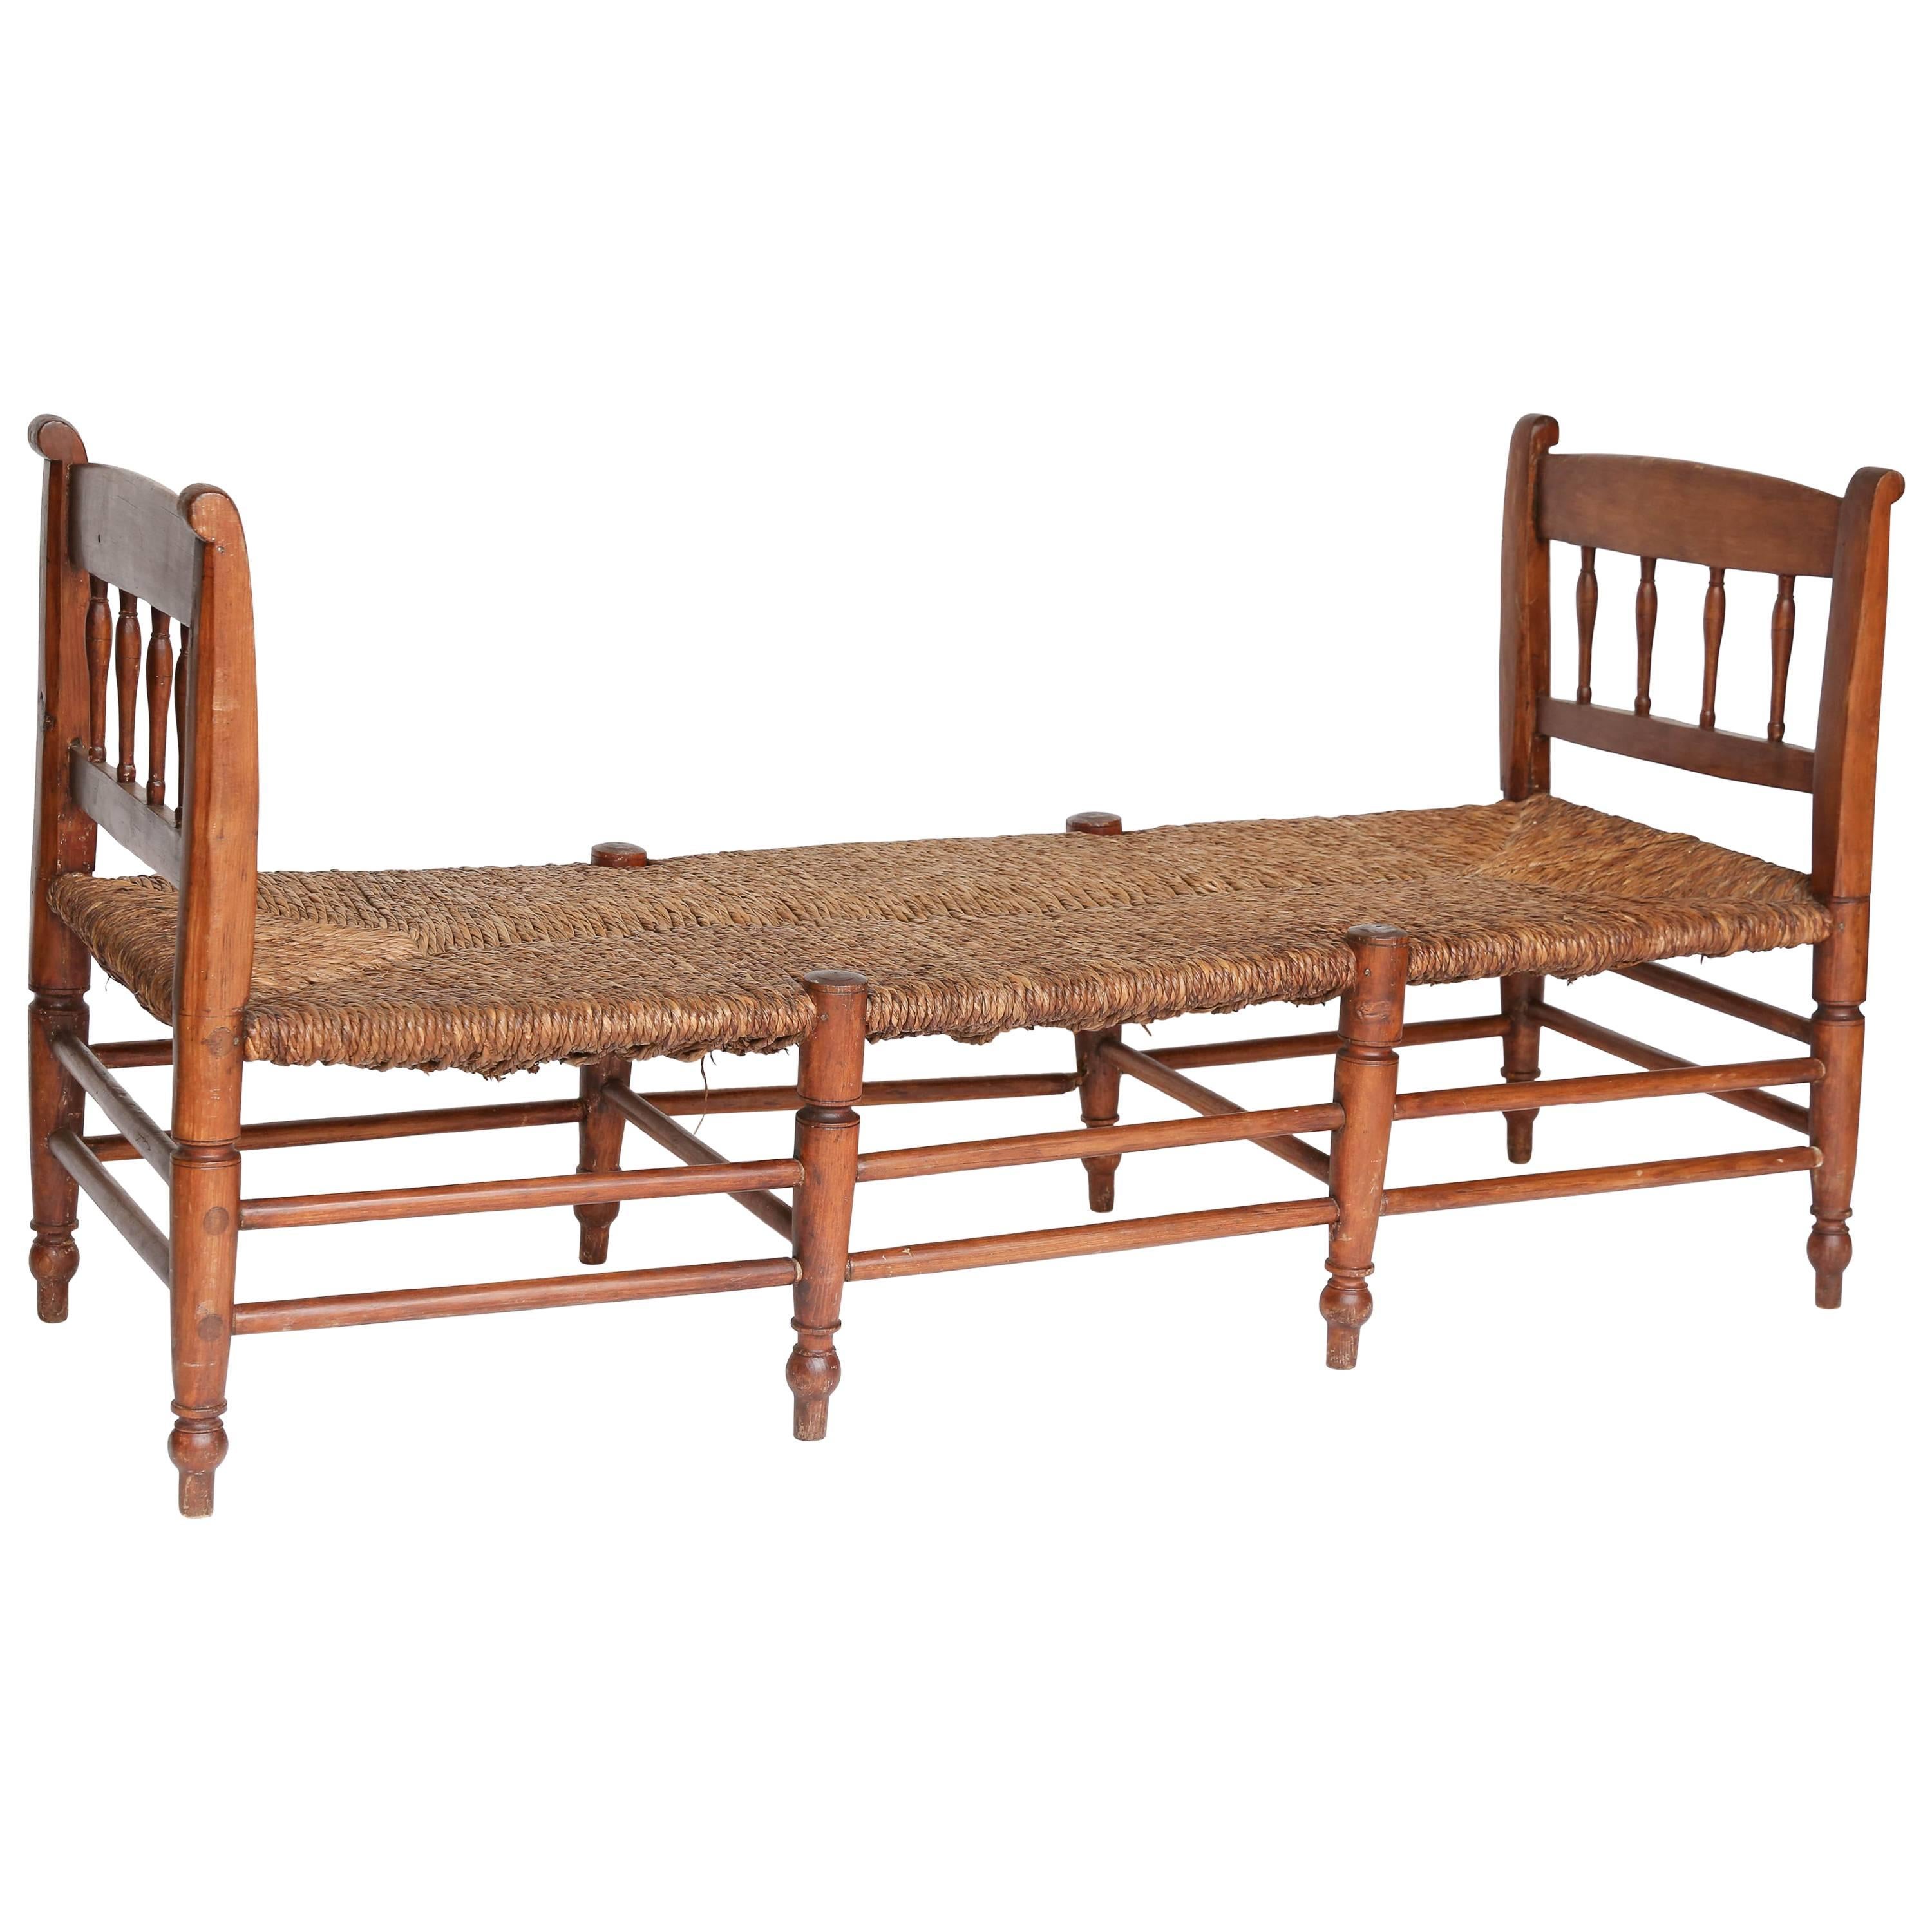 Antique Rush Seat Bench from France